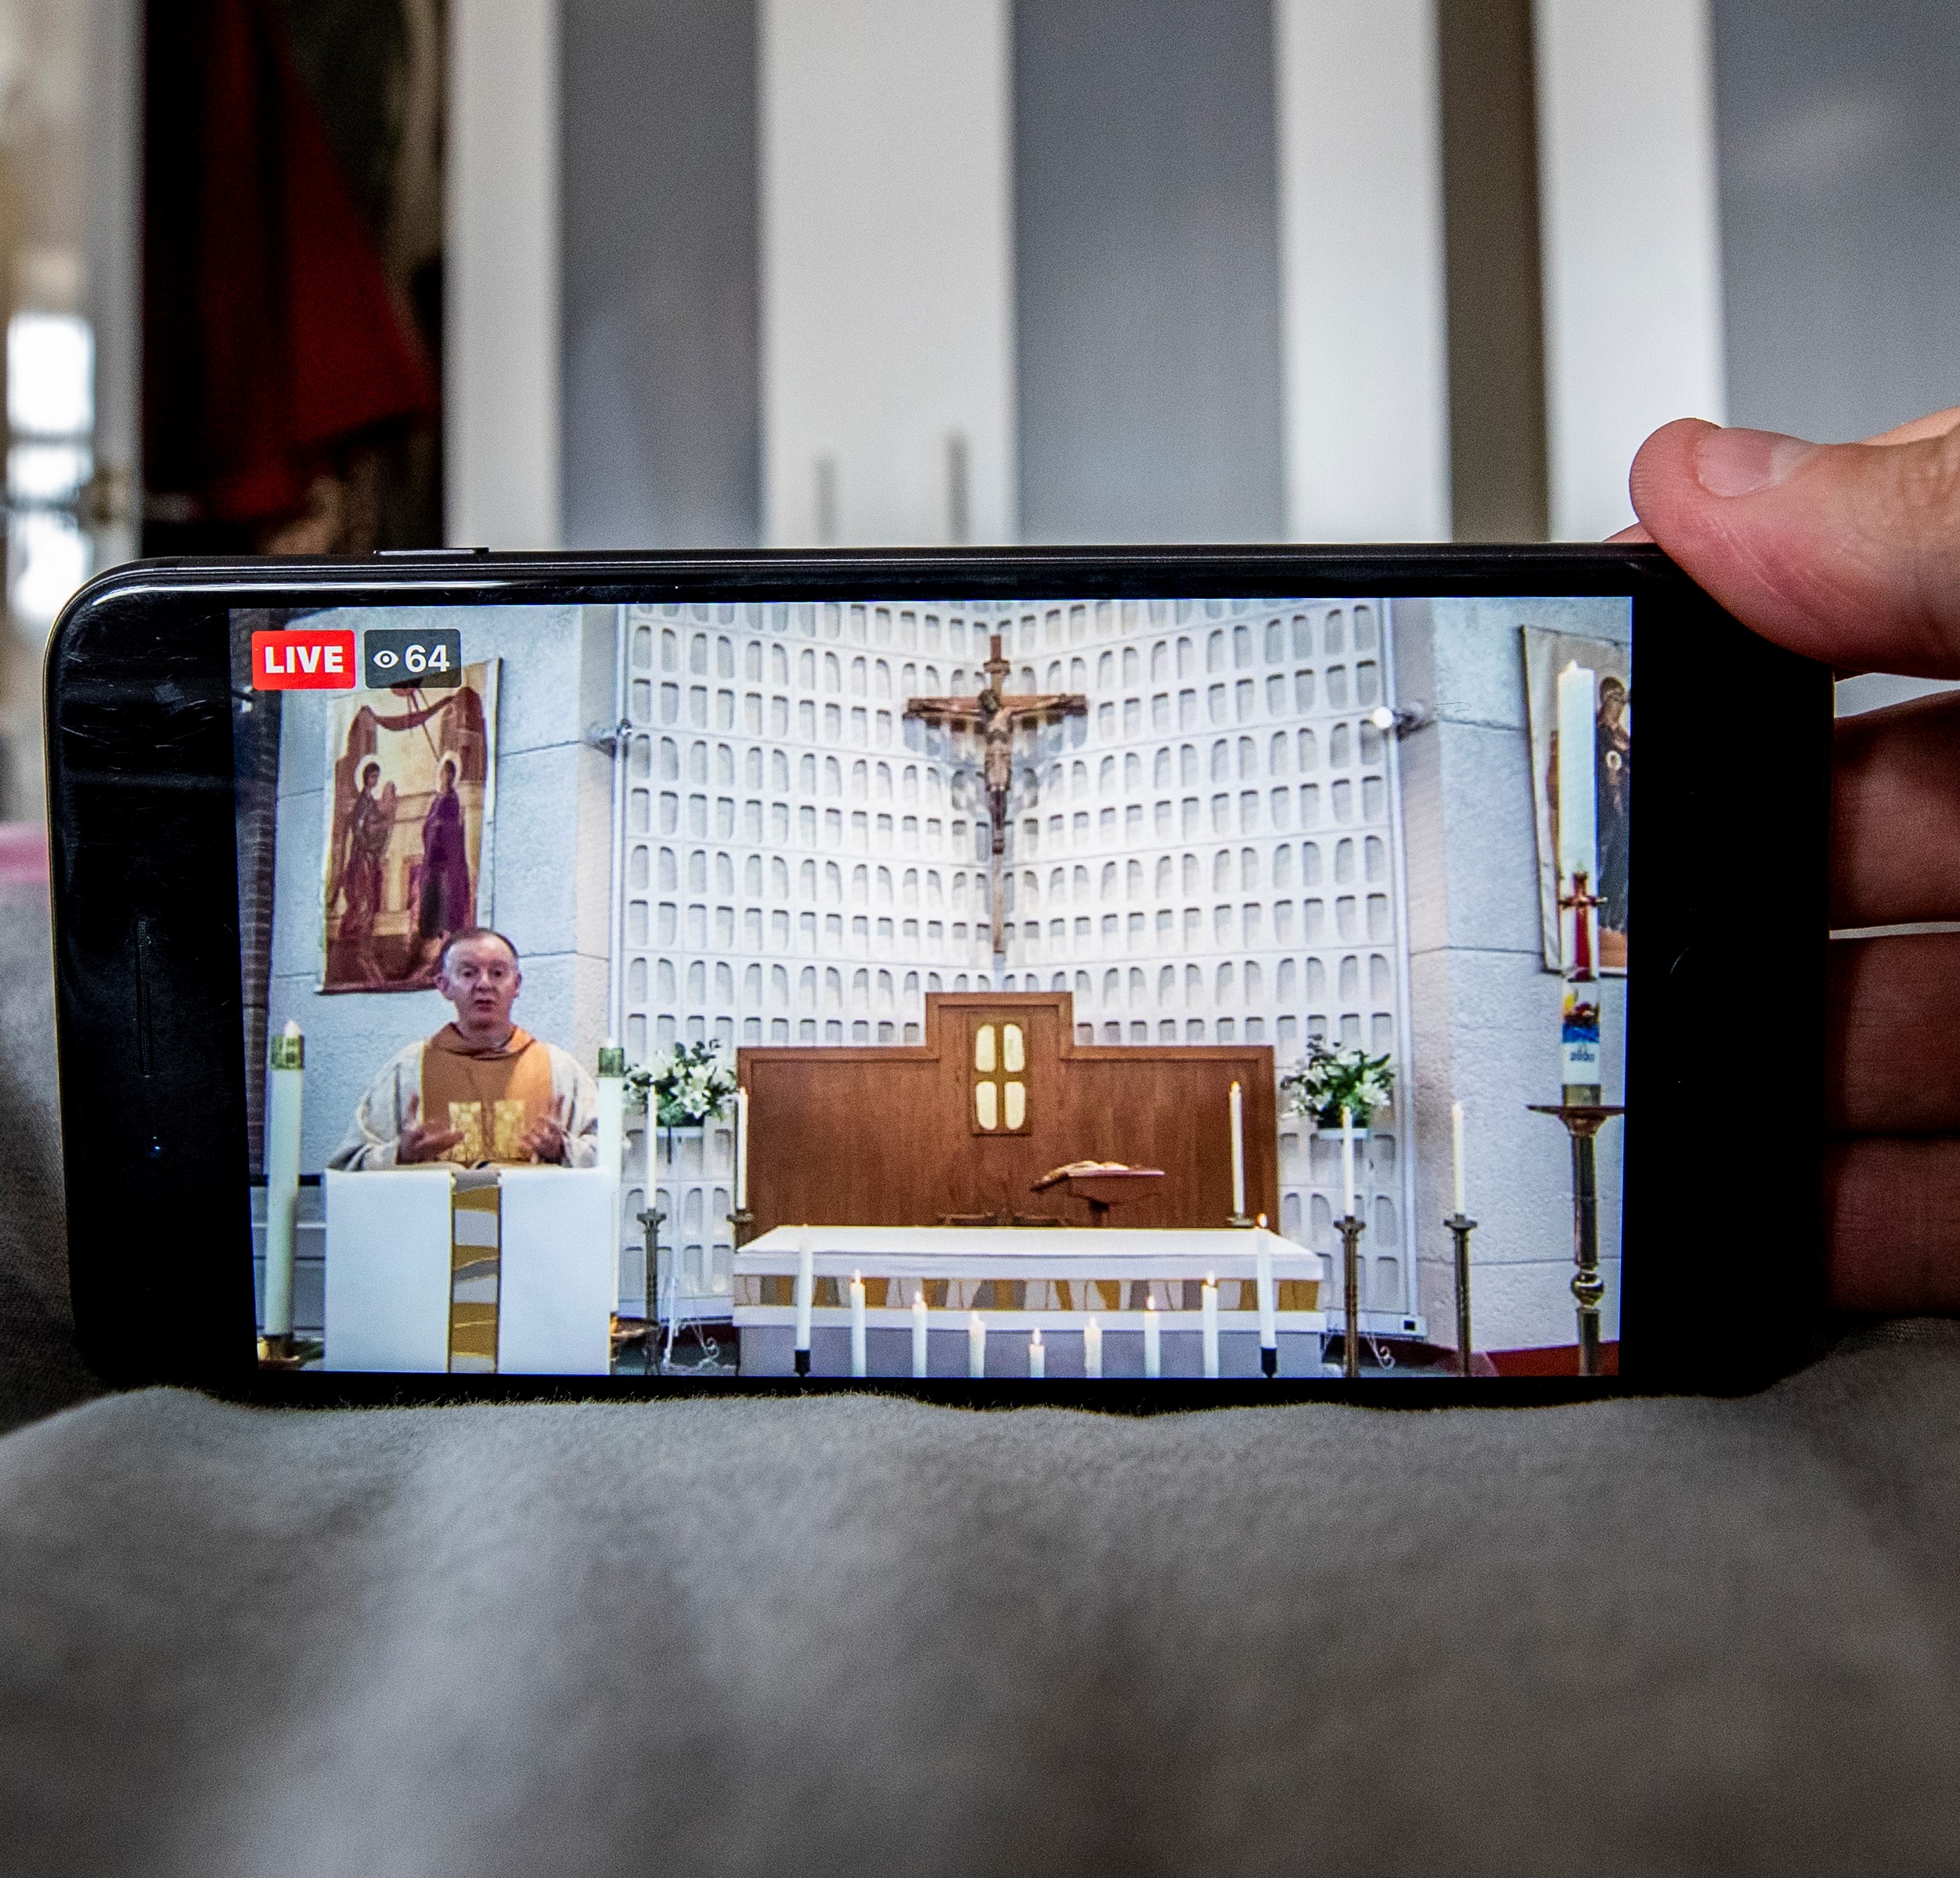 Can online services help draw people back to the Church?